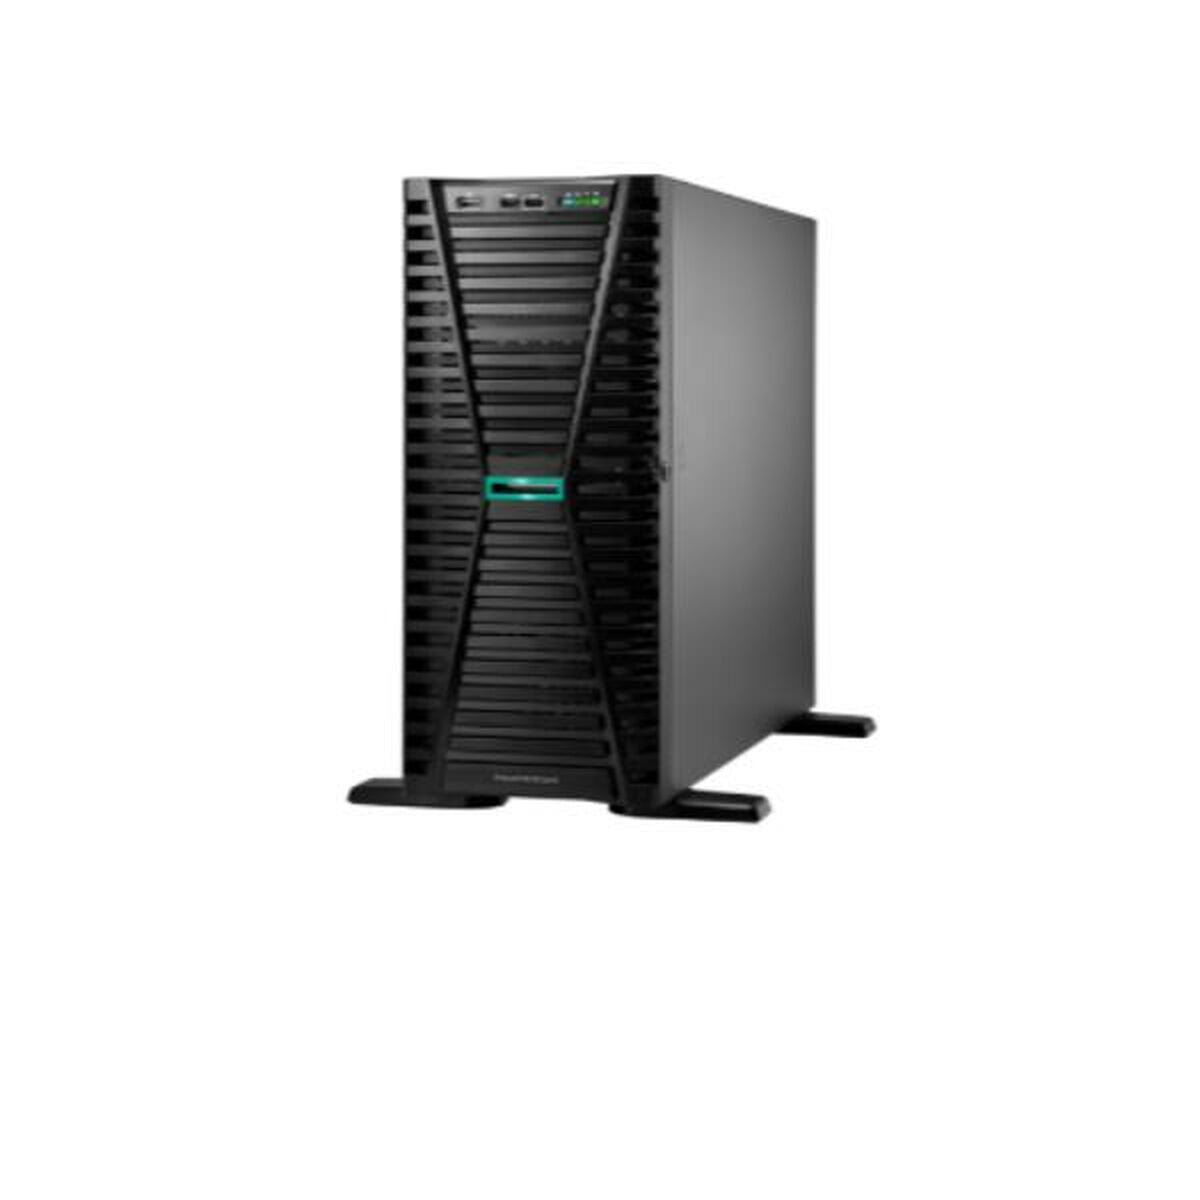 Server Tower HPE P55637-421 16 GB RAM, HPE, Computing, server-tower-hpe-p55637-421-16-gb-ram, Brand_HPE, category-reference-2609, category-reference-2791, category-reference-2799, category-reference-t-19685, category-reference-t-19905, computers / components, Condition_NEW, office, Price_+ 1000, Teleworking, RiotNook